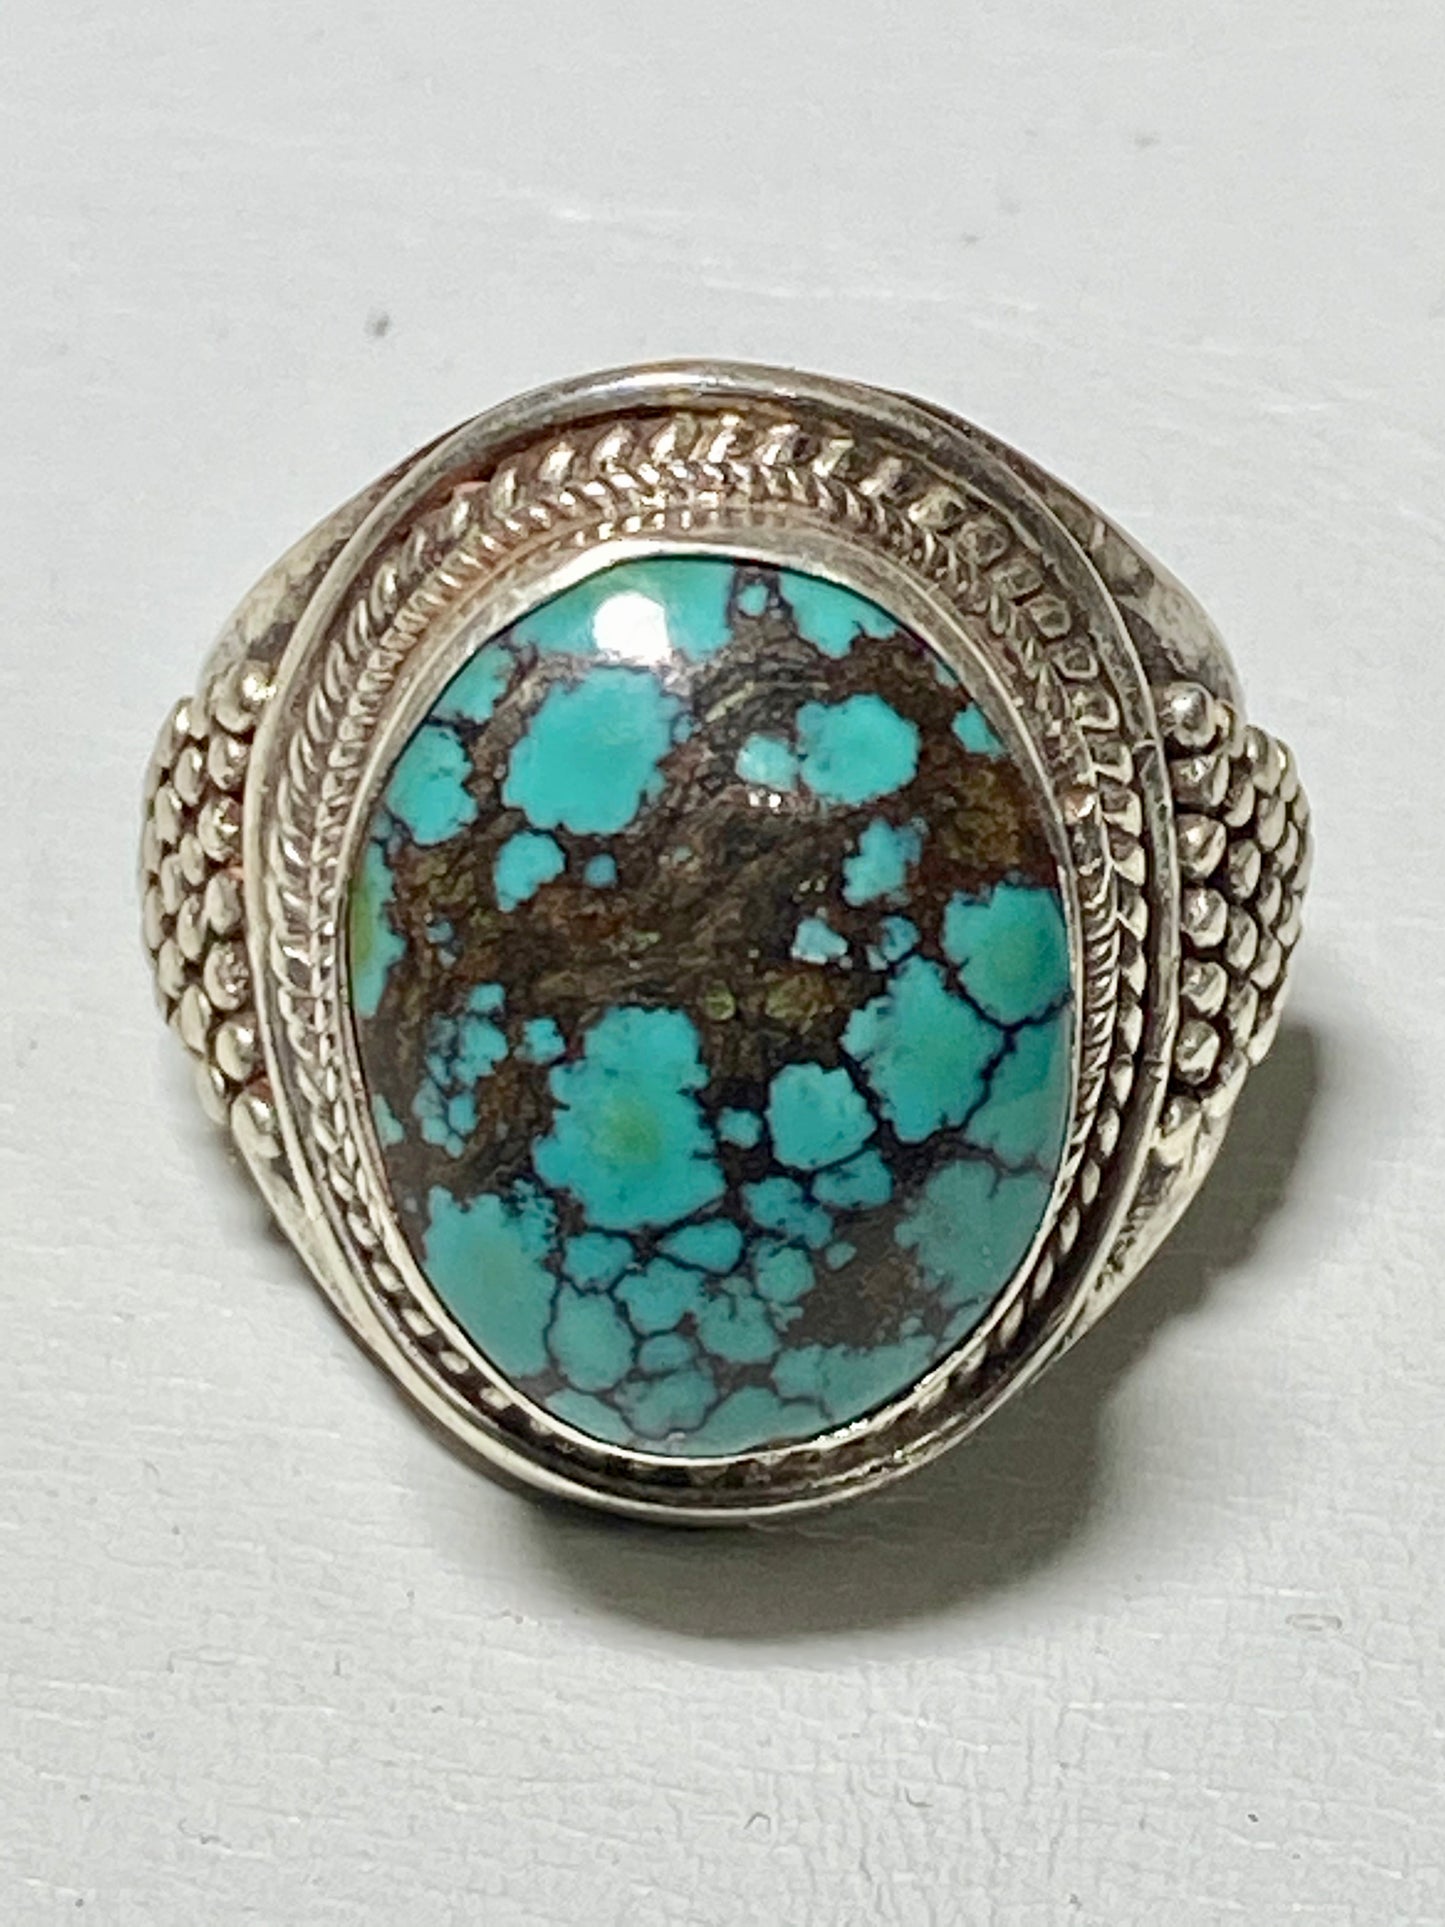 Turquoise ring  men women cigar band rope design sterling silver